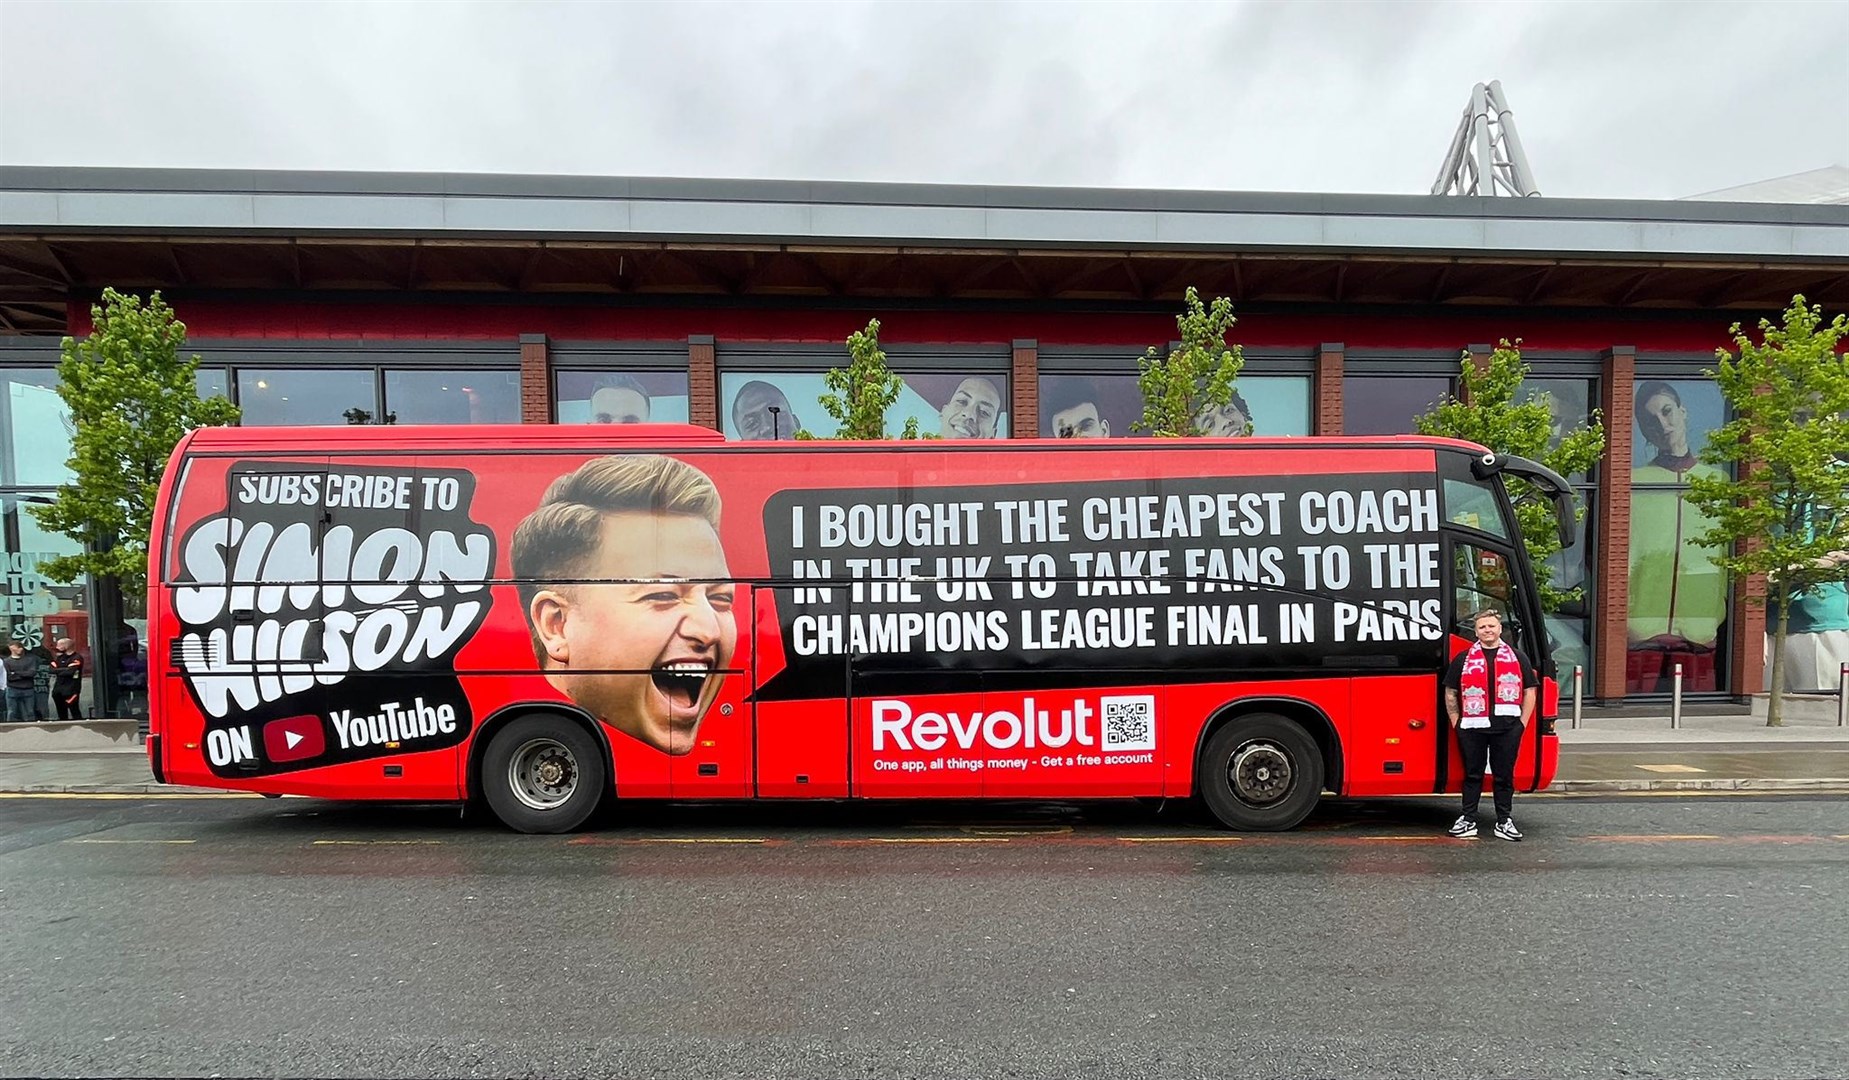 The coach cost £5,000 to buy (Simon Wilson/PA)